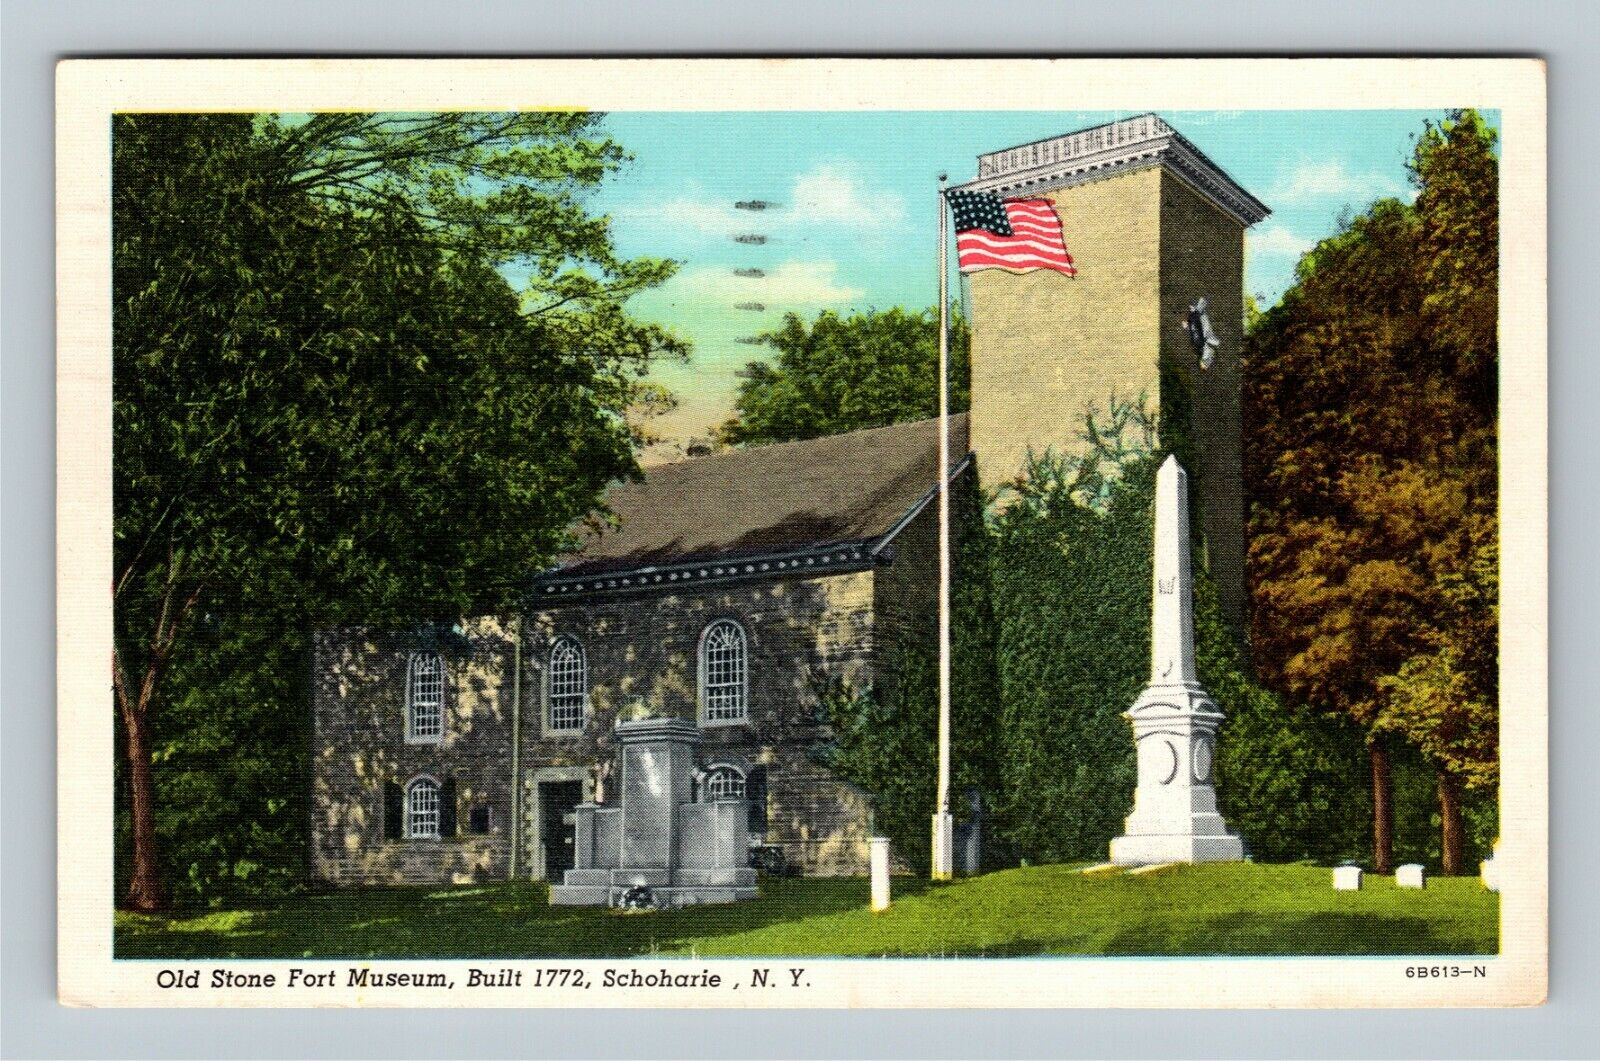 Schoharie NY, Old Stone Fort Museum, New York c1952 Vintage Postcard